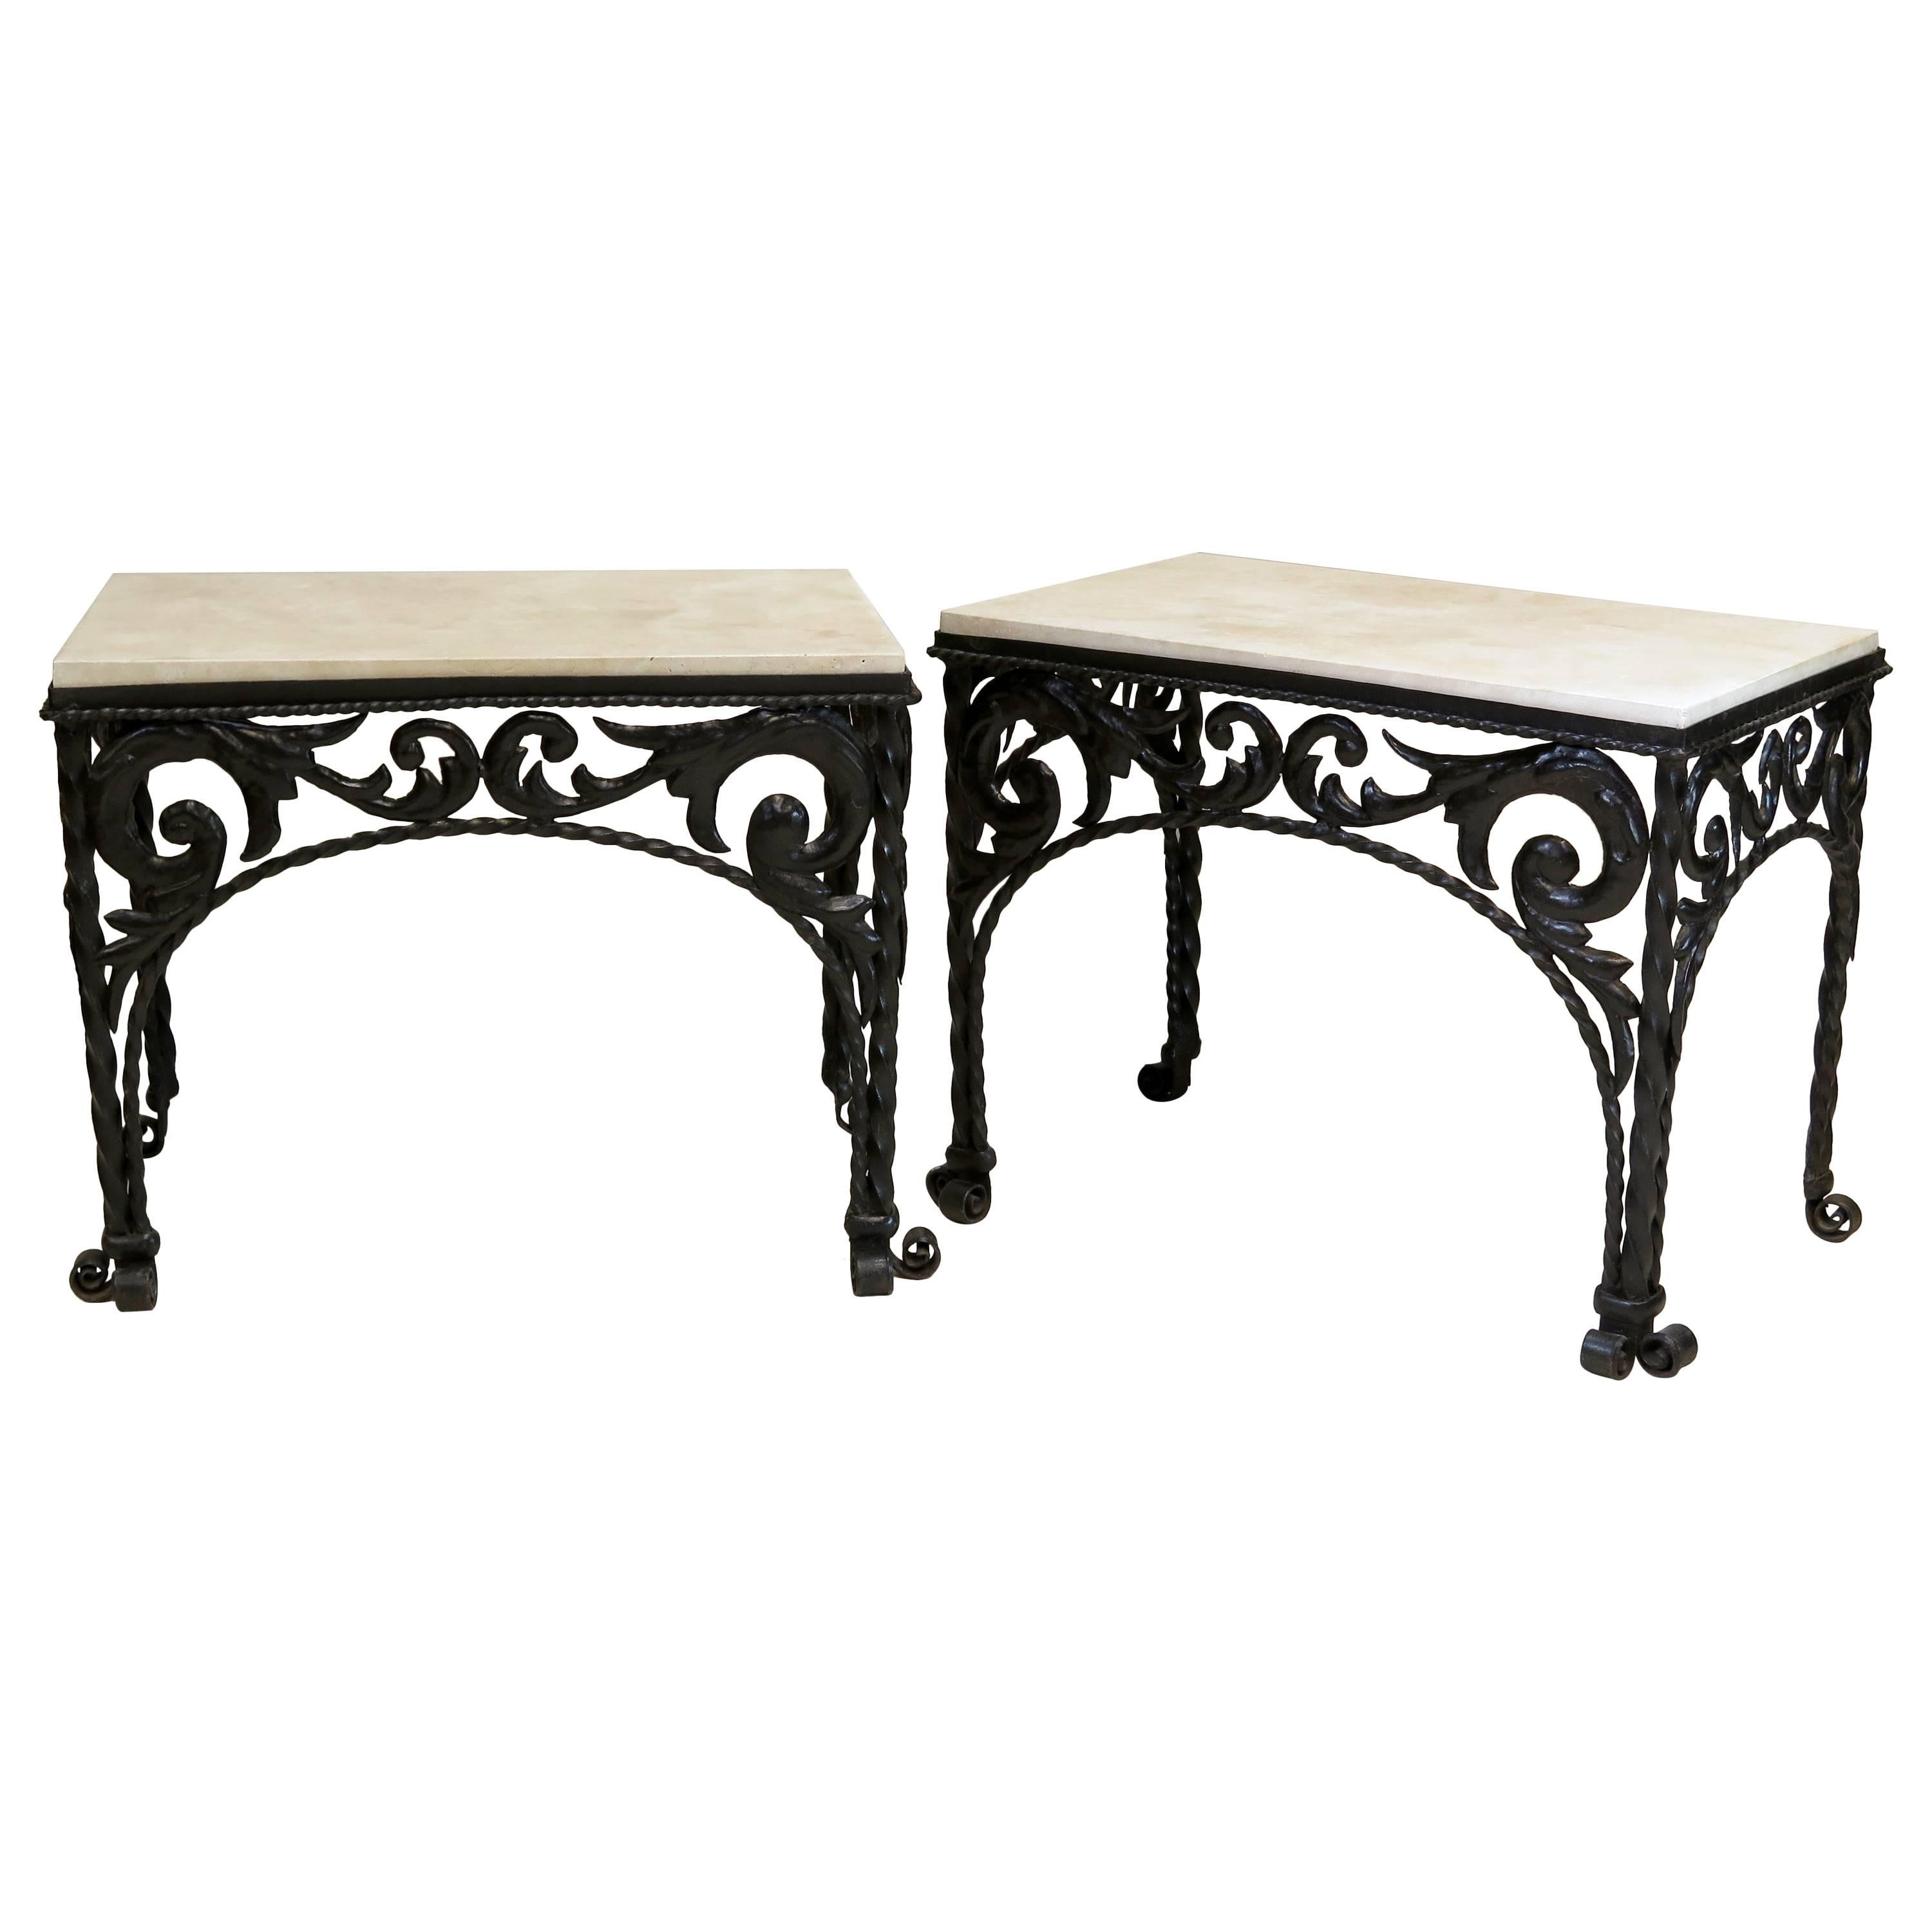 Pair of Ornate Iron and Travertine Side Tables, Spain, circa 1920s For Sale